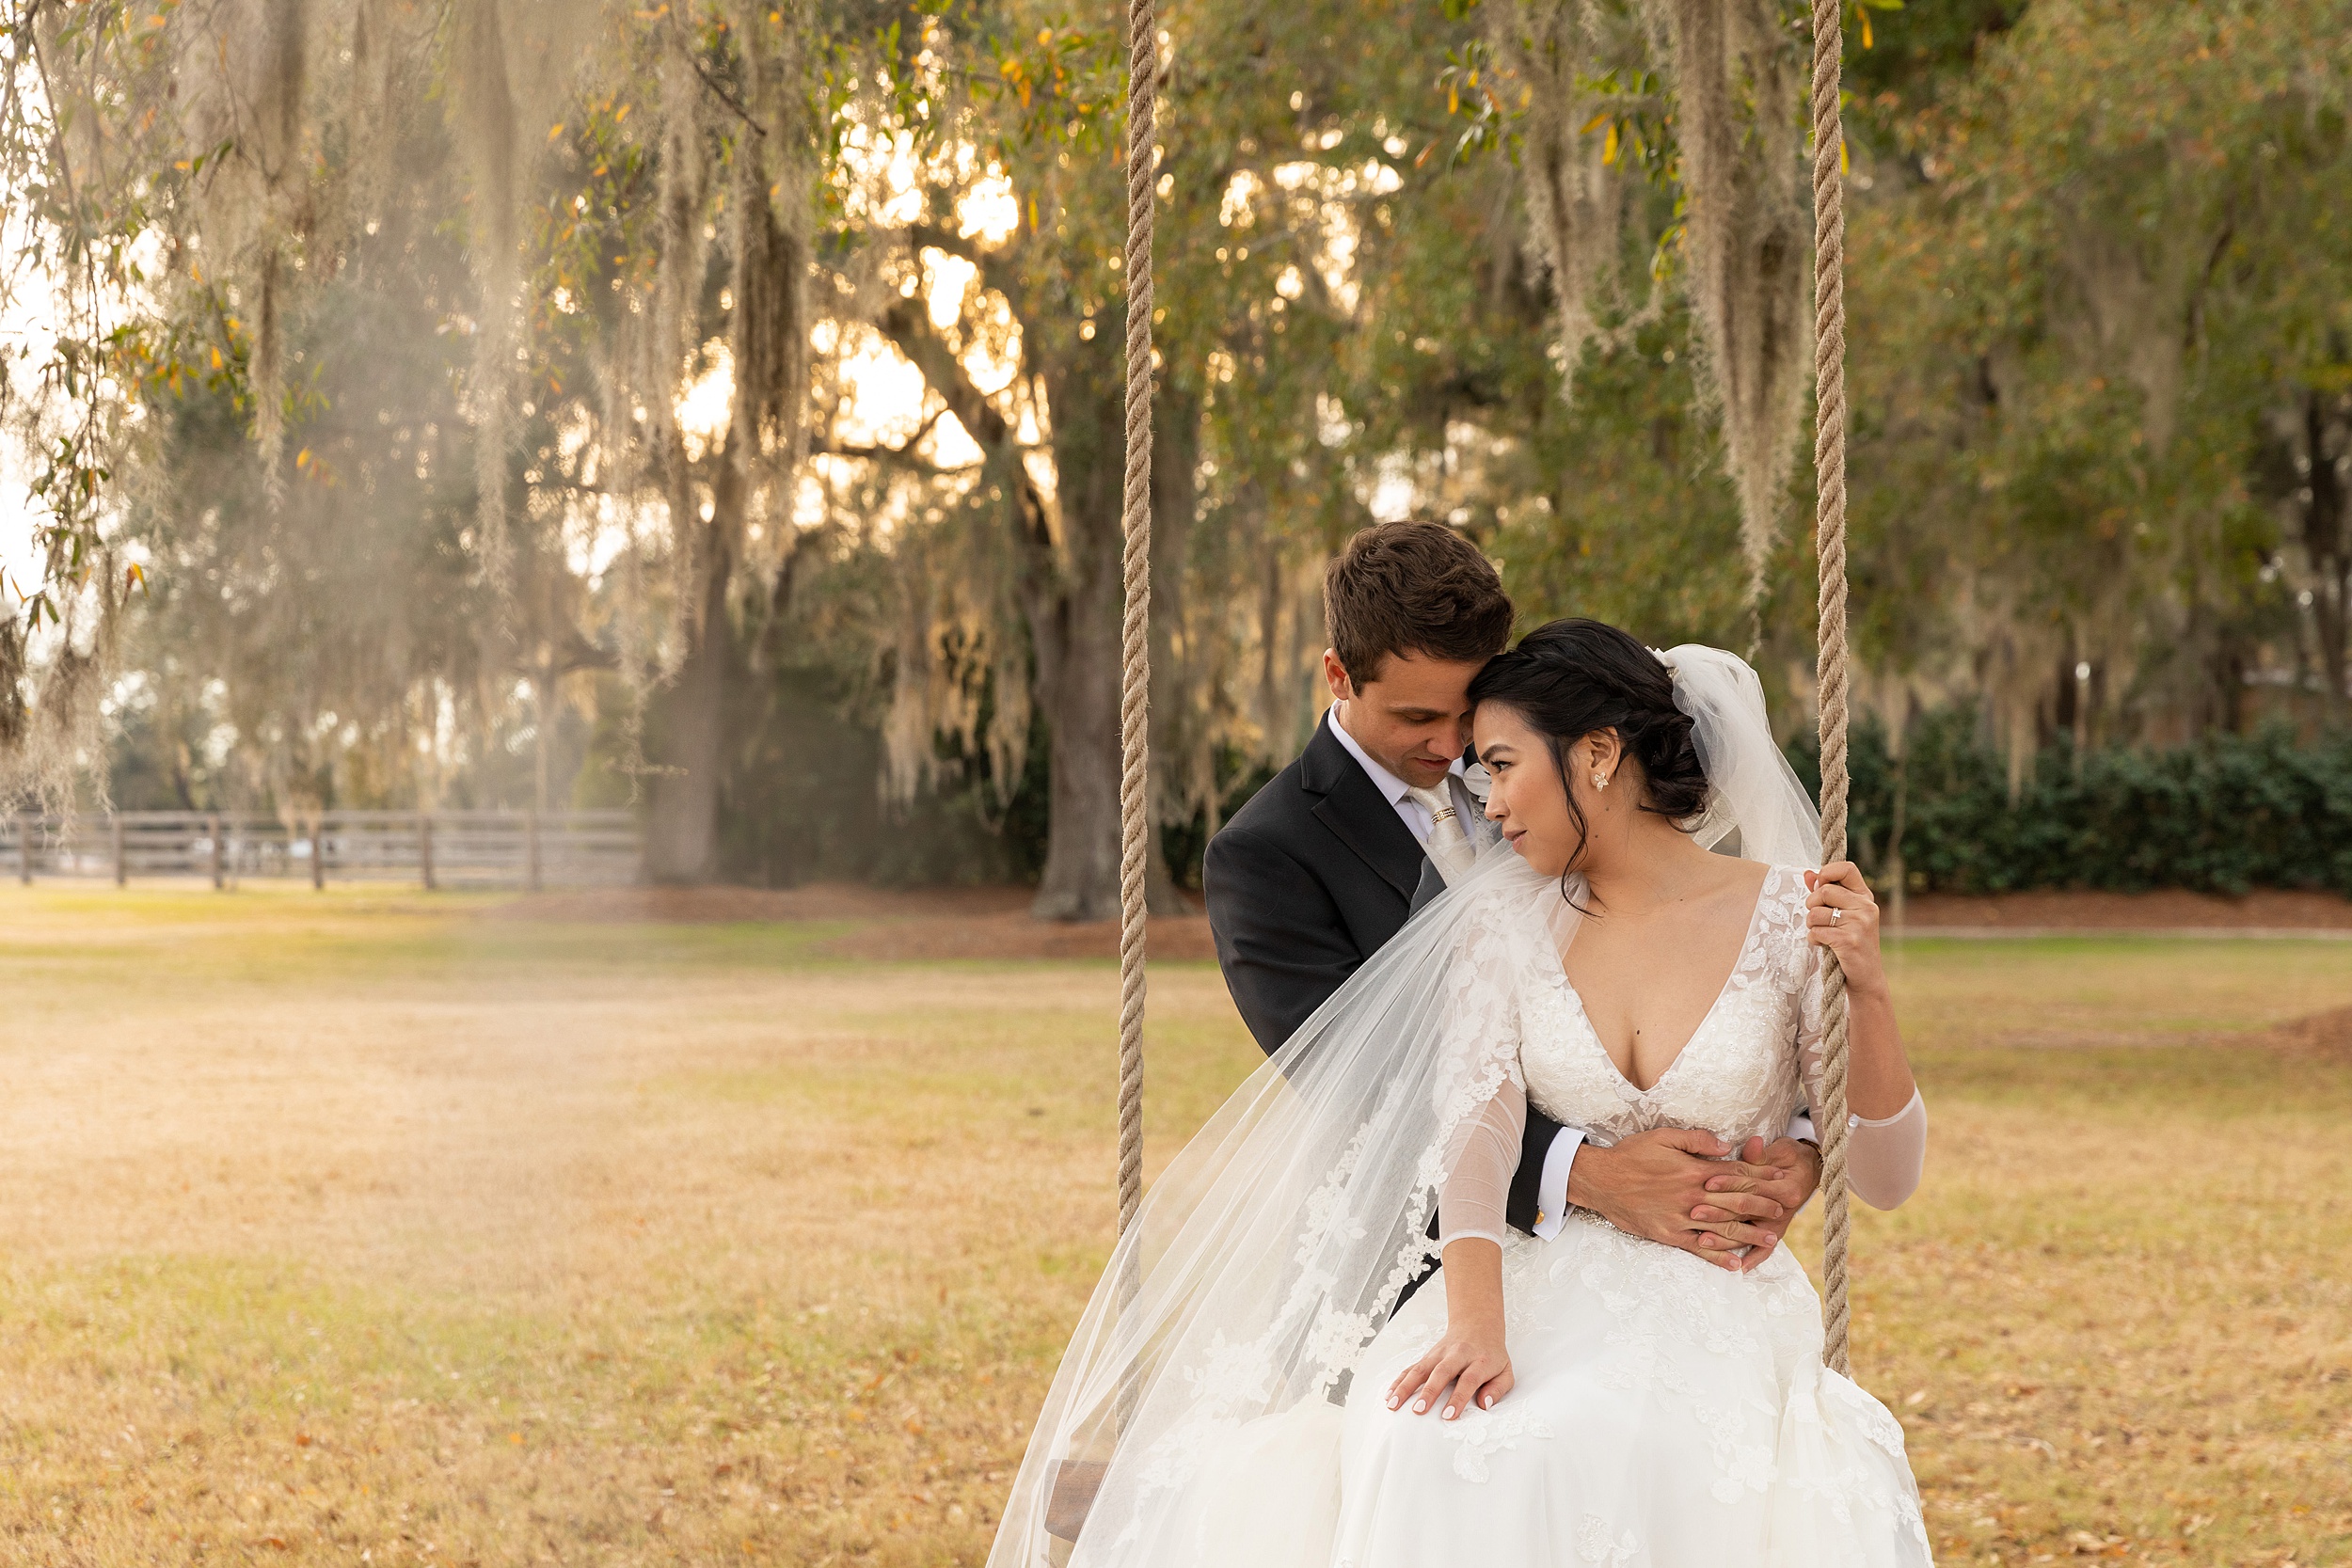 A bride sits on a swing in a park lawn while being hugged by her groom at sunset at one of the orlando wedding venues